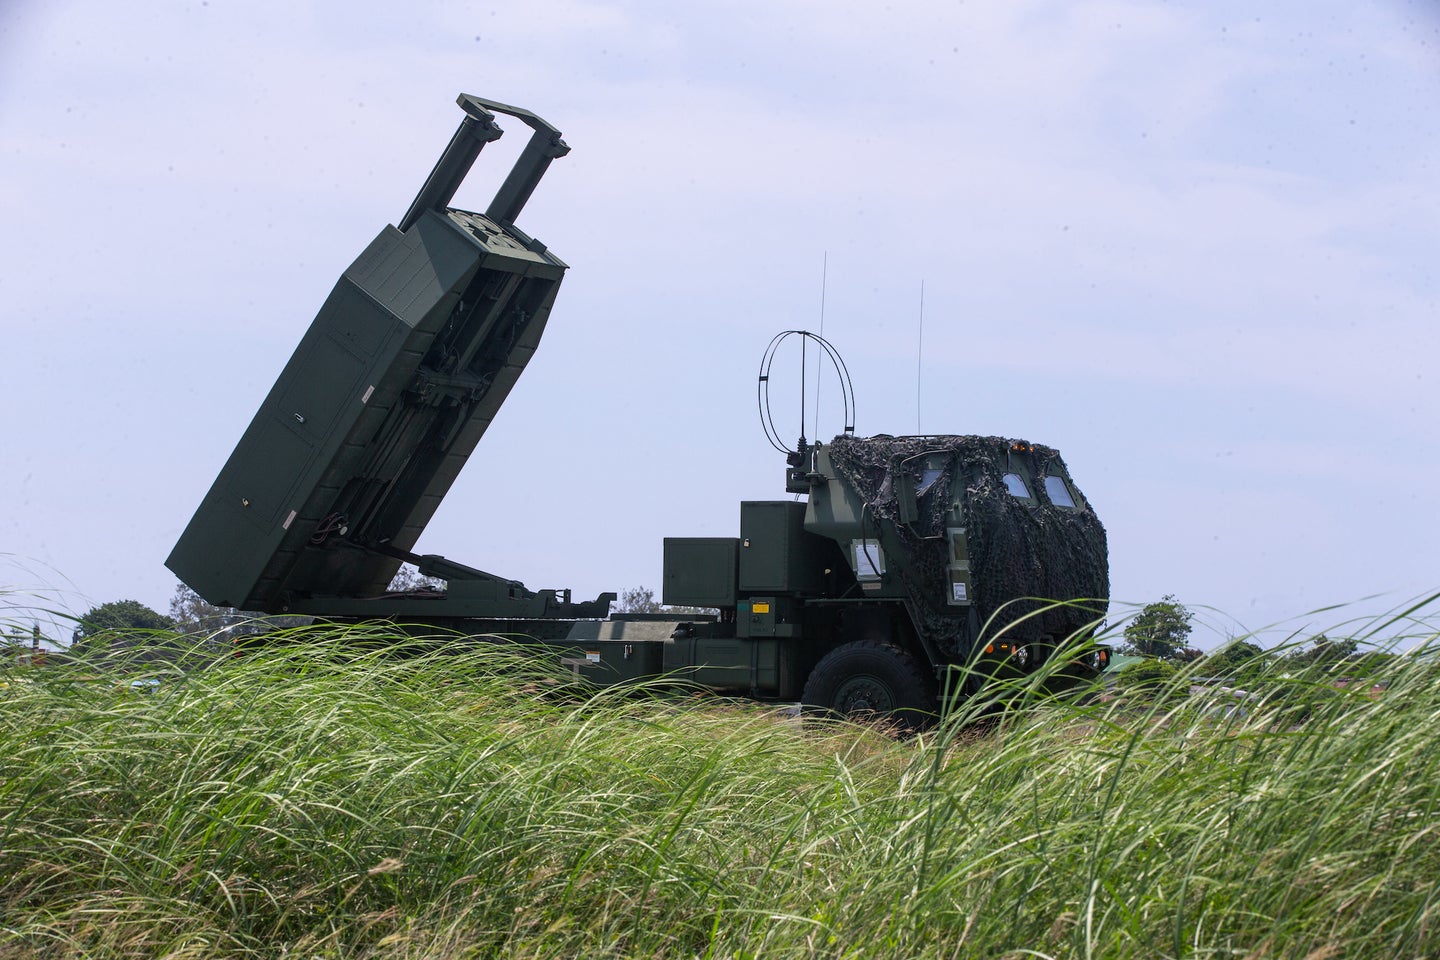 A High Mobility Artillery Rocket System in the Philippines in June, 2022 as part of an exercise. 